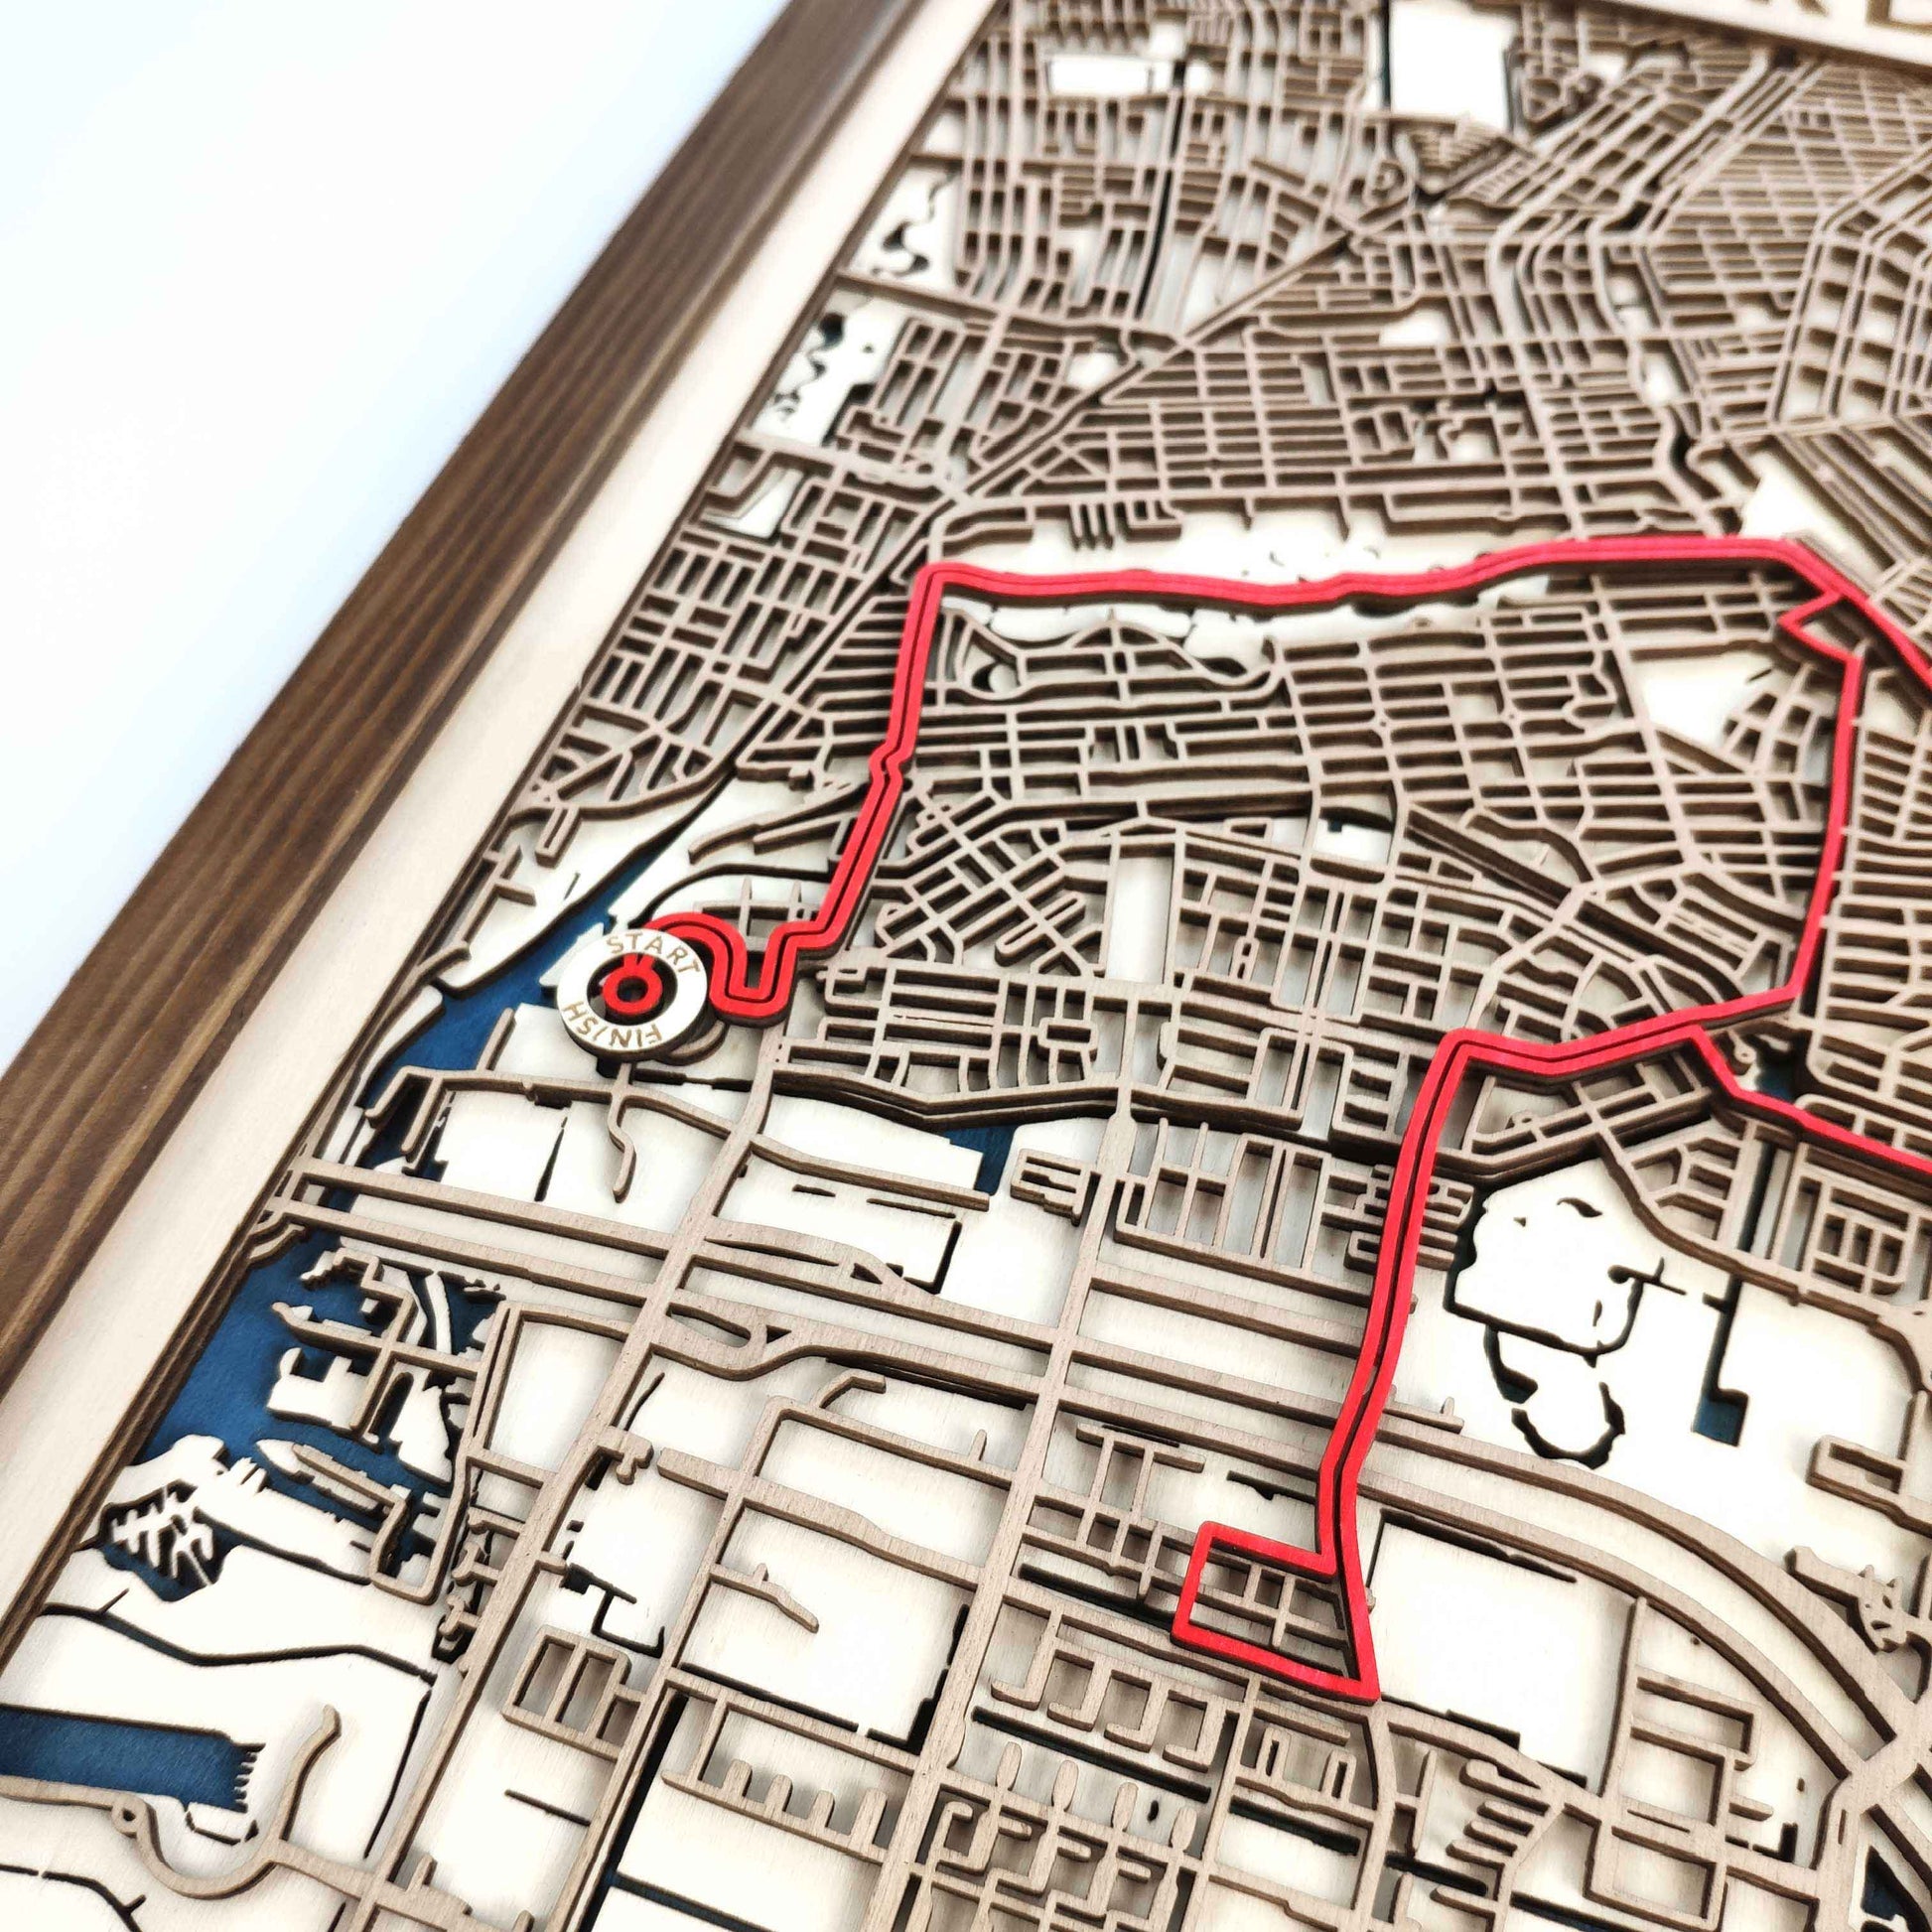 Amsterdam Marathon Commemorative Wooden Route Map – Collector's Item by CityWood - Custom Wood Map Art - Unique Laser Cut Engraved - Anniversary Gift